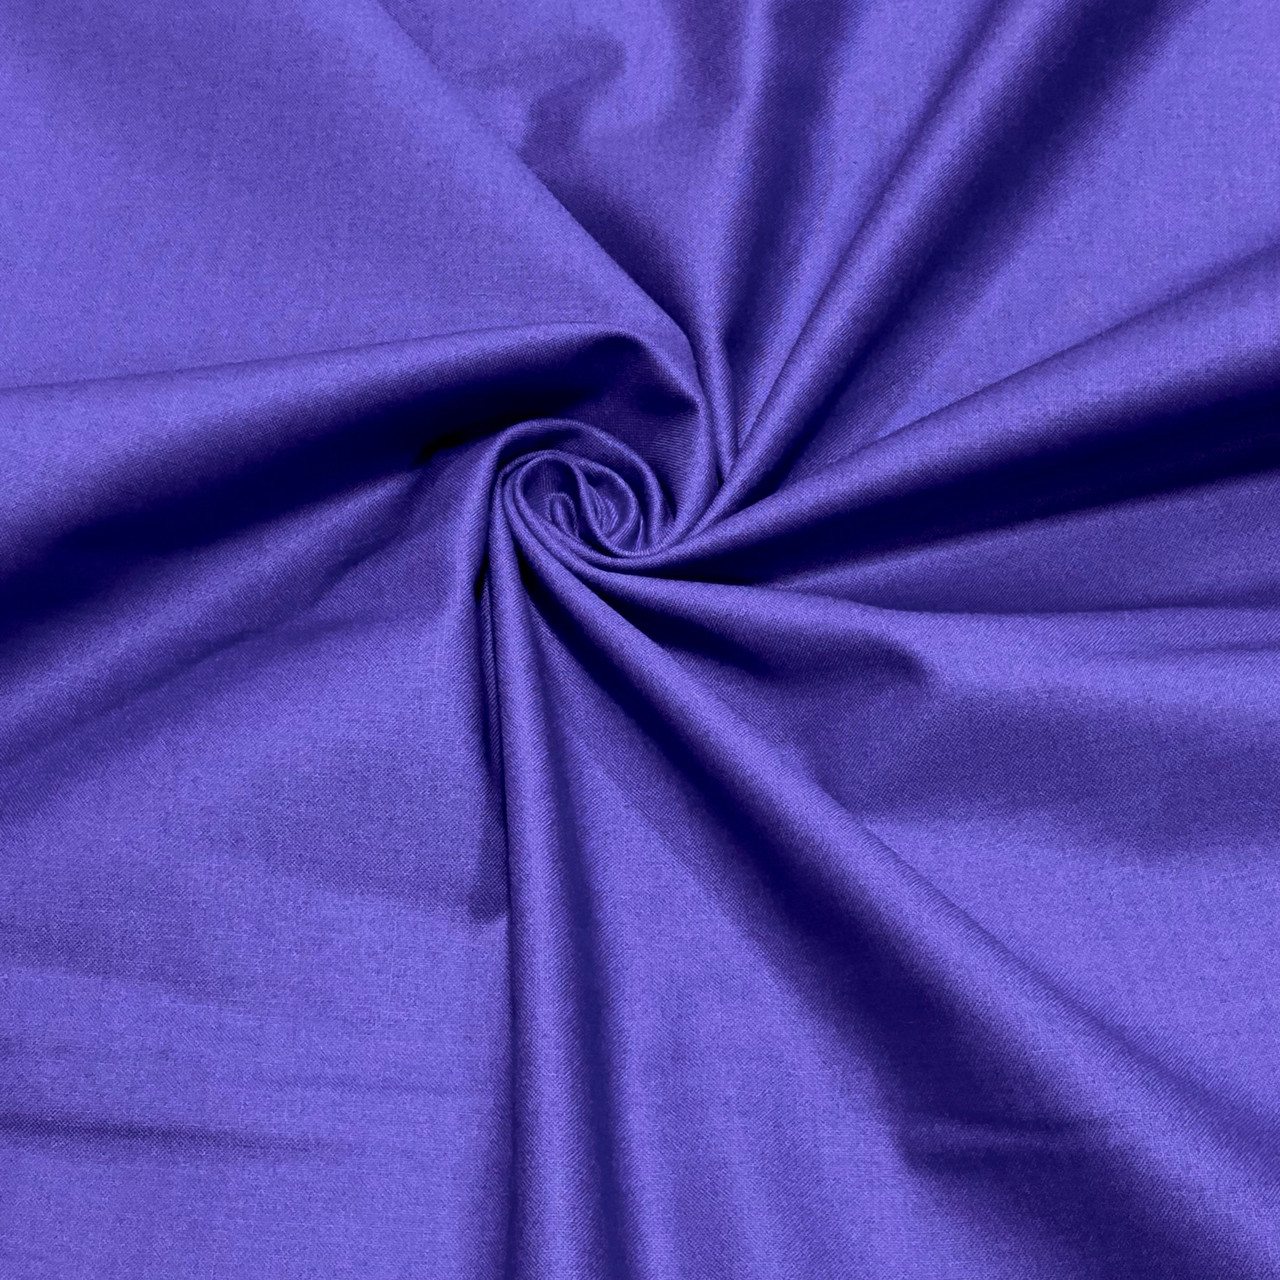 Solid Violet Cotton Sheeting Fabric-Coordinating Violet Solid Cotton Fabric